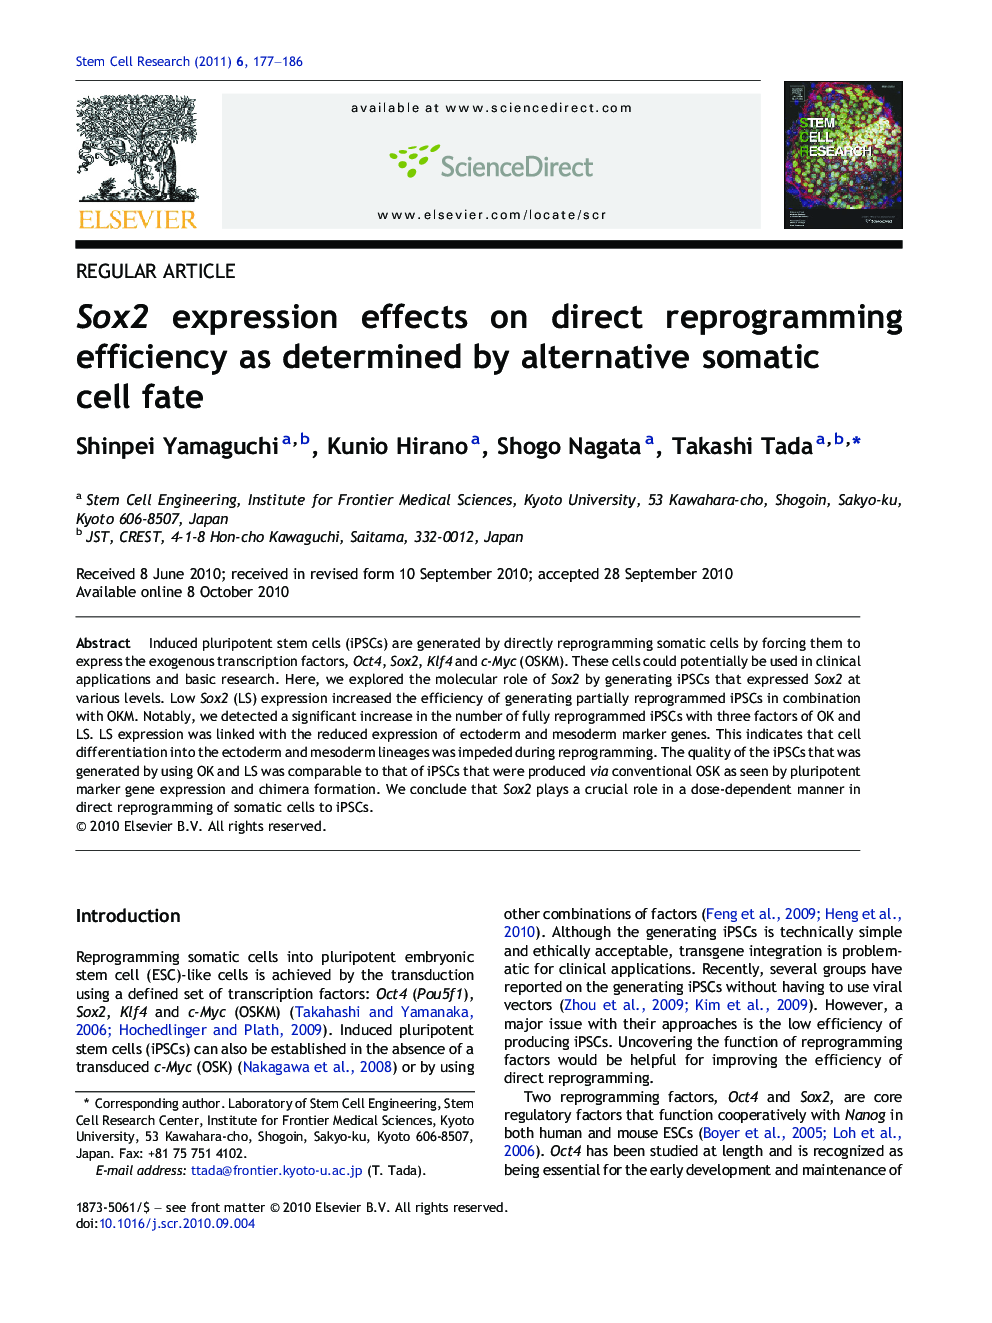 Sox2 expression effects on direct reprogramming efficiency as determined by alternative somatic cell fate